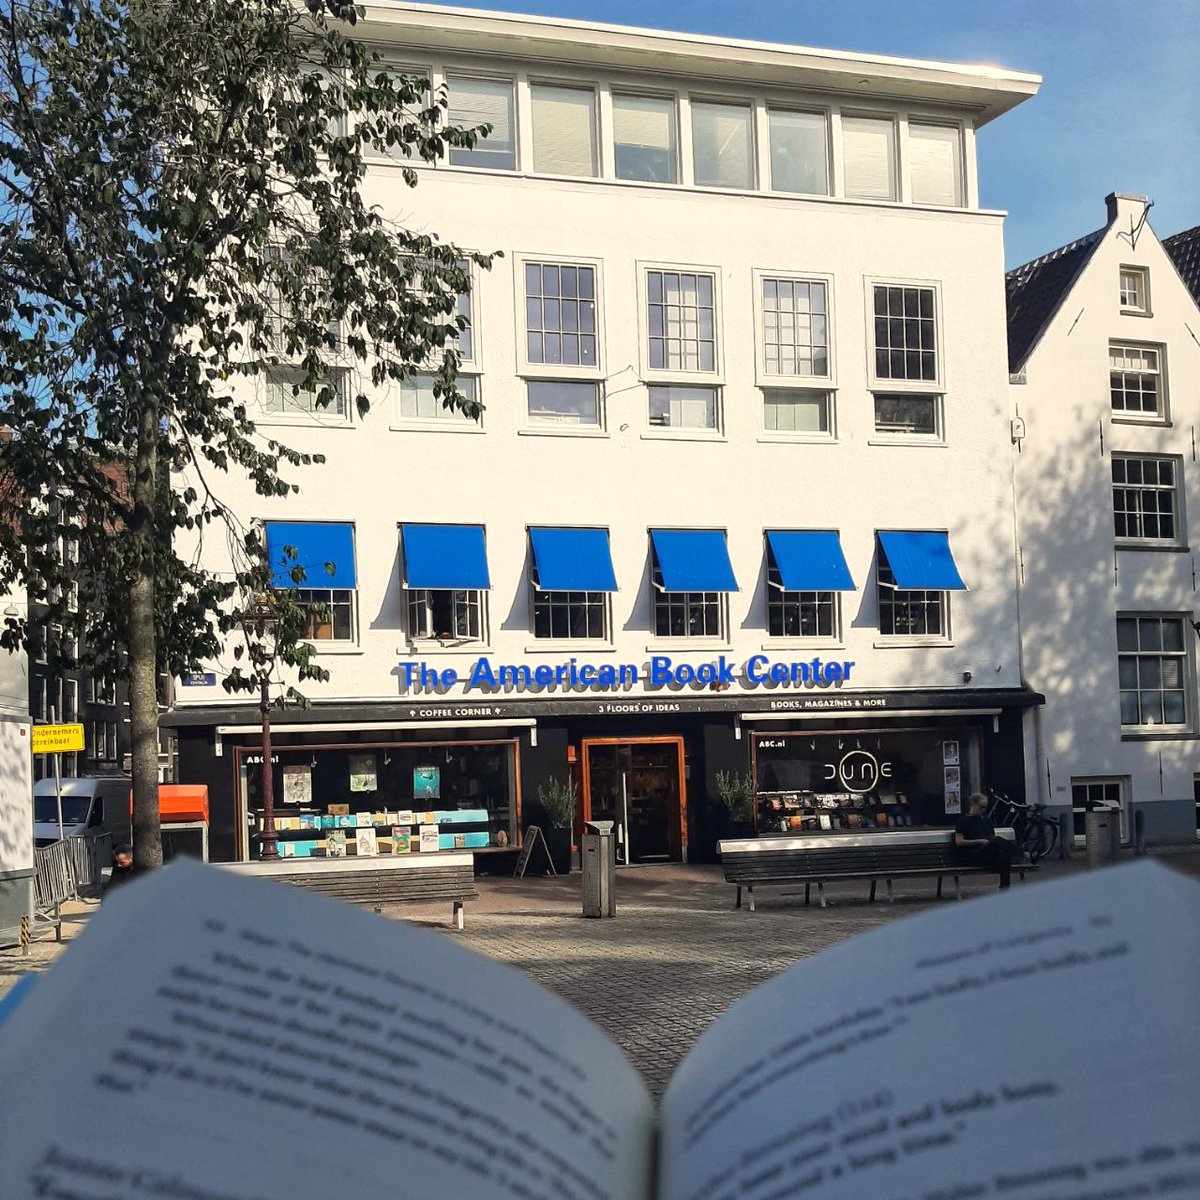 The weather's been a little wild this week, but we've definitely already enjoyed a few sunny afternoons this spring - perfect for grabbing a book and finding a sunny spot to read. What is your preferred 'outside reading' location? 📚🌞